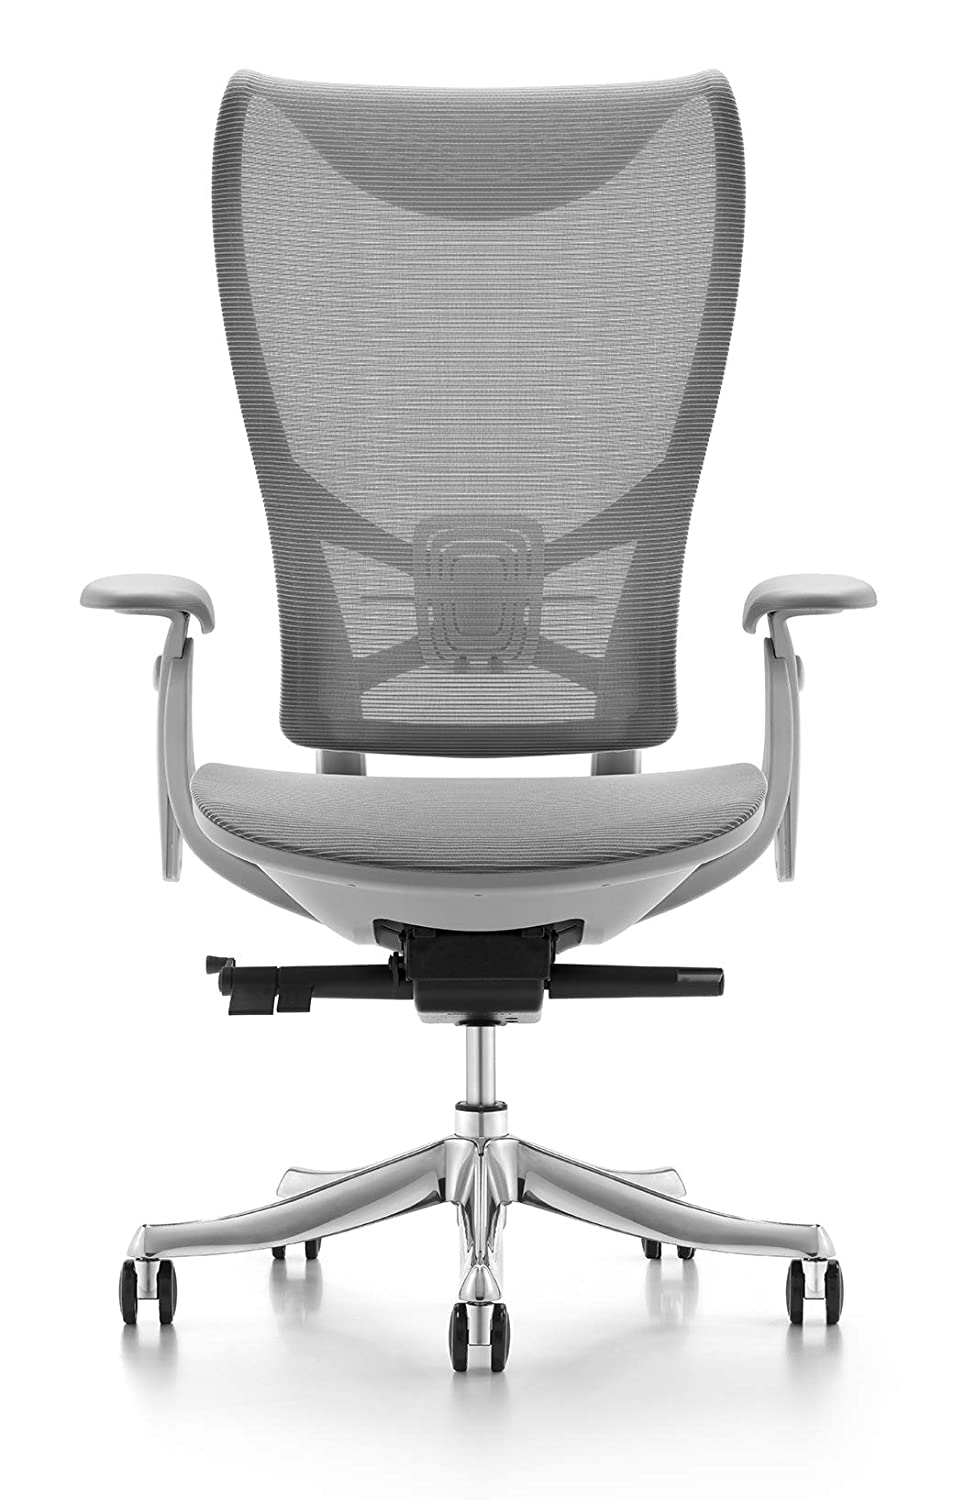 JD9 High Back Ergonomic Chair with Advanced Multi Angle Backrest Locking Quick Tilt Mechanism with Body Weight Tension Adjustment for Office & Home.